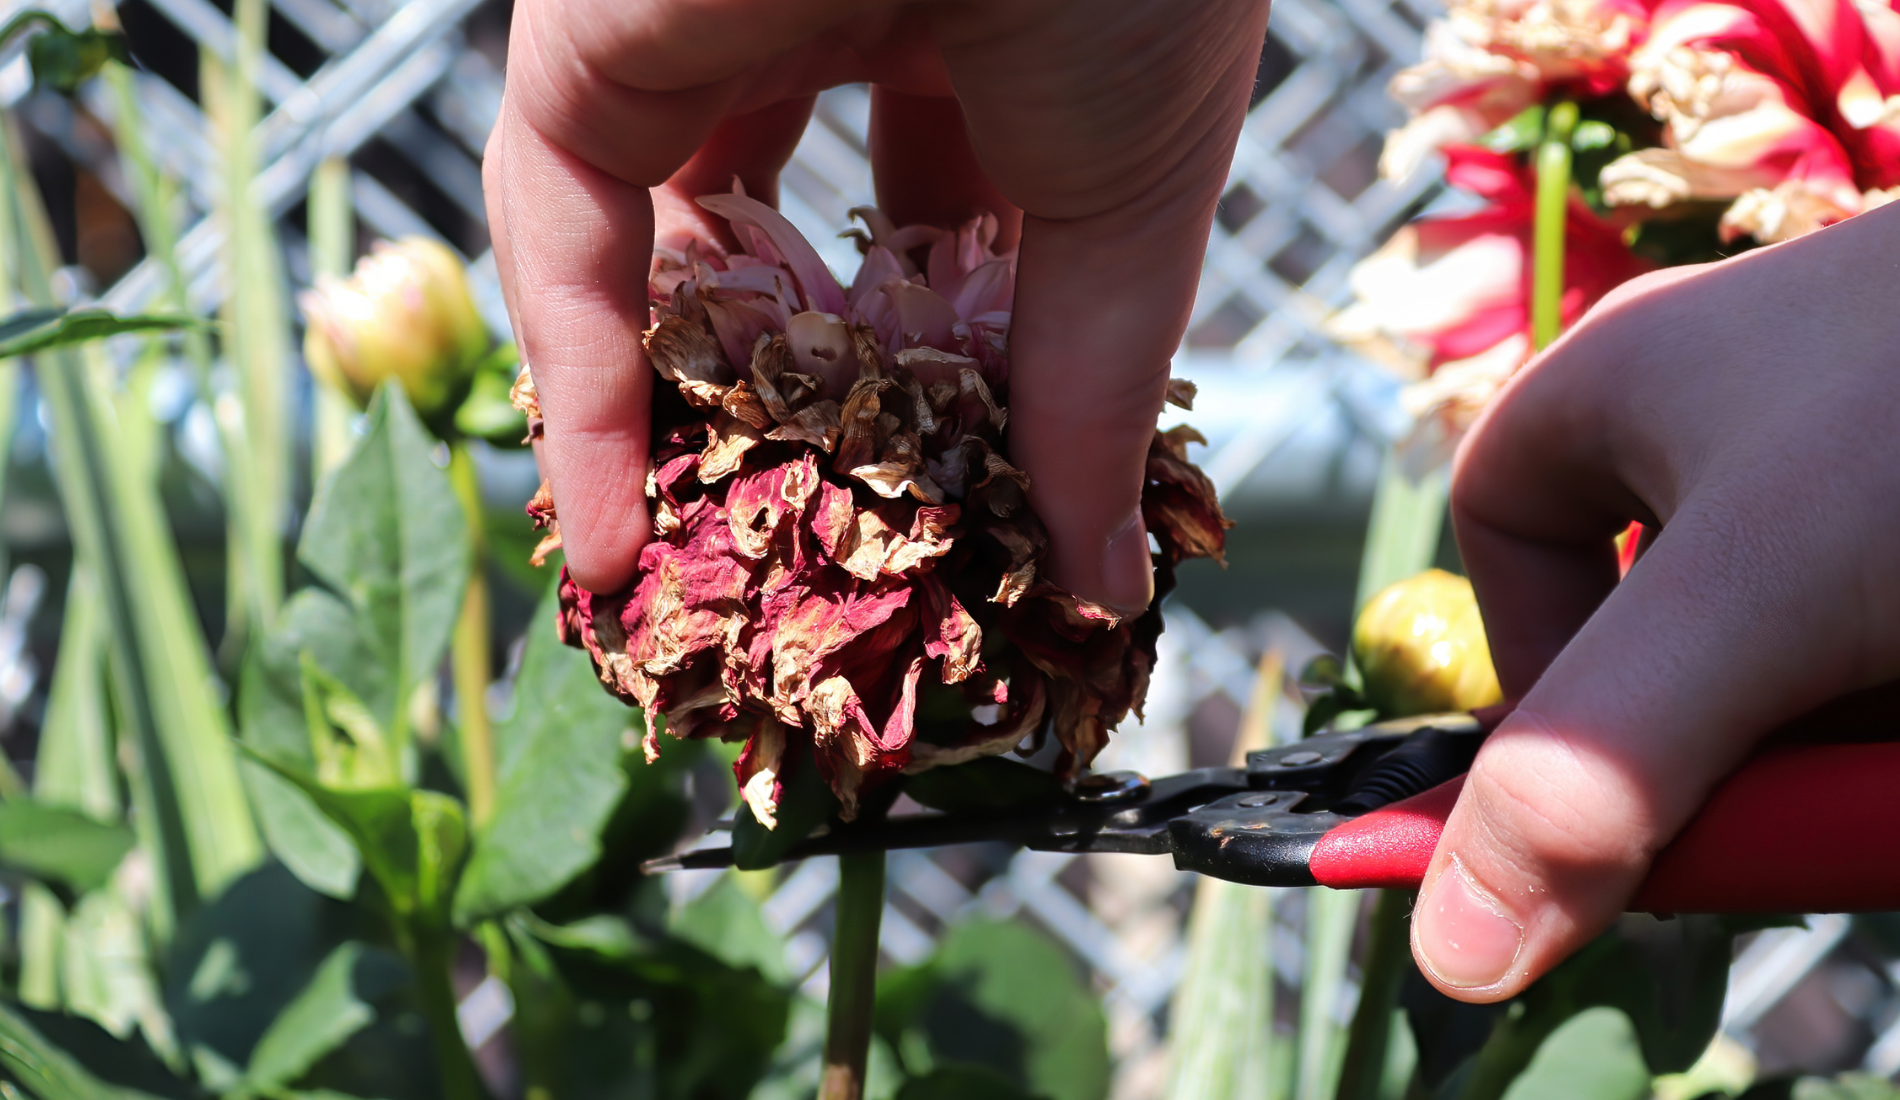 Deadheading and Clipping Back Spent Dahlia Flowers